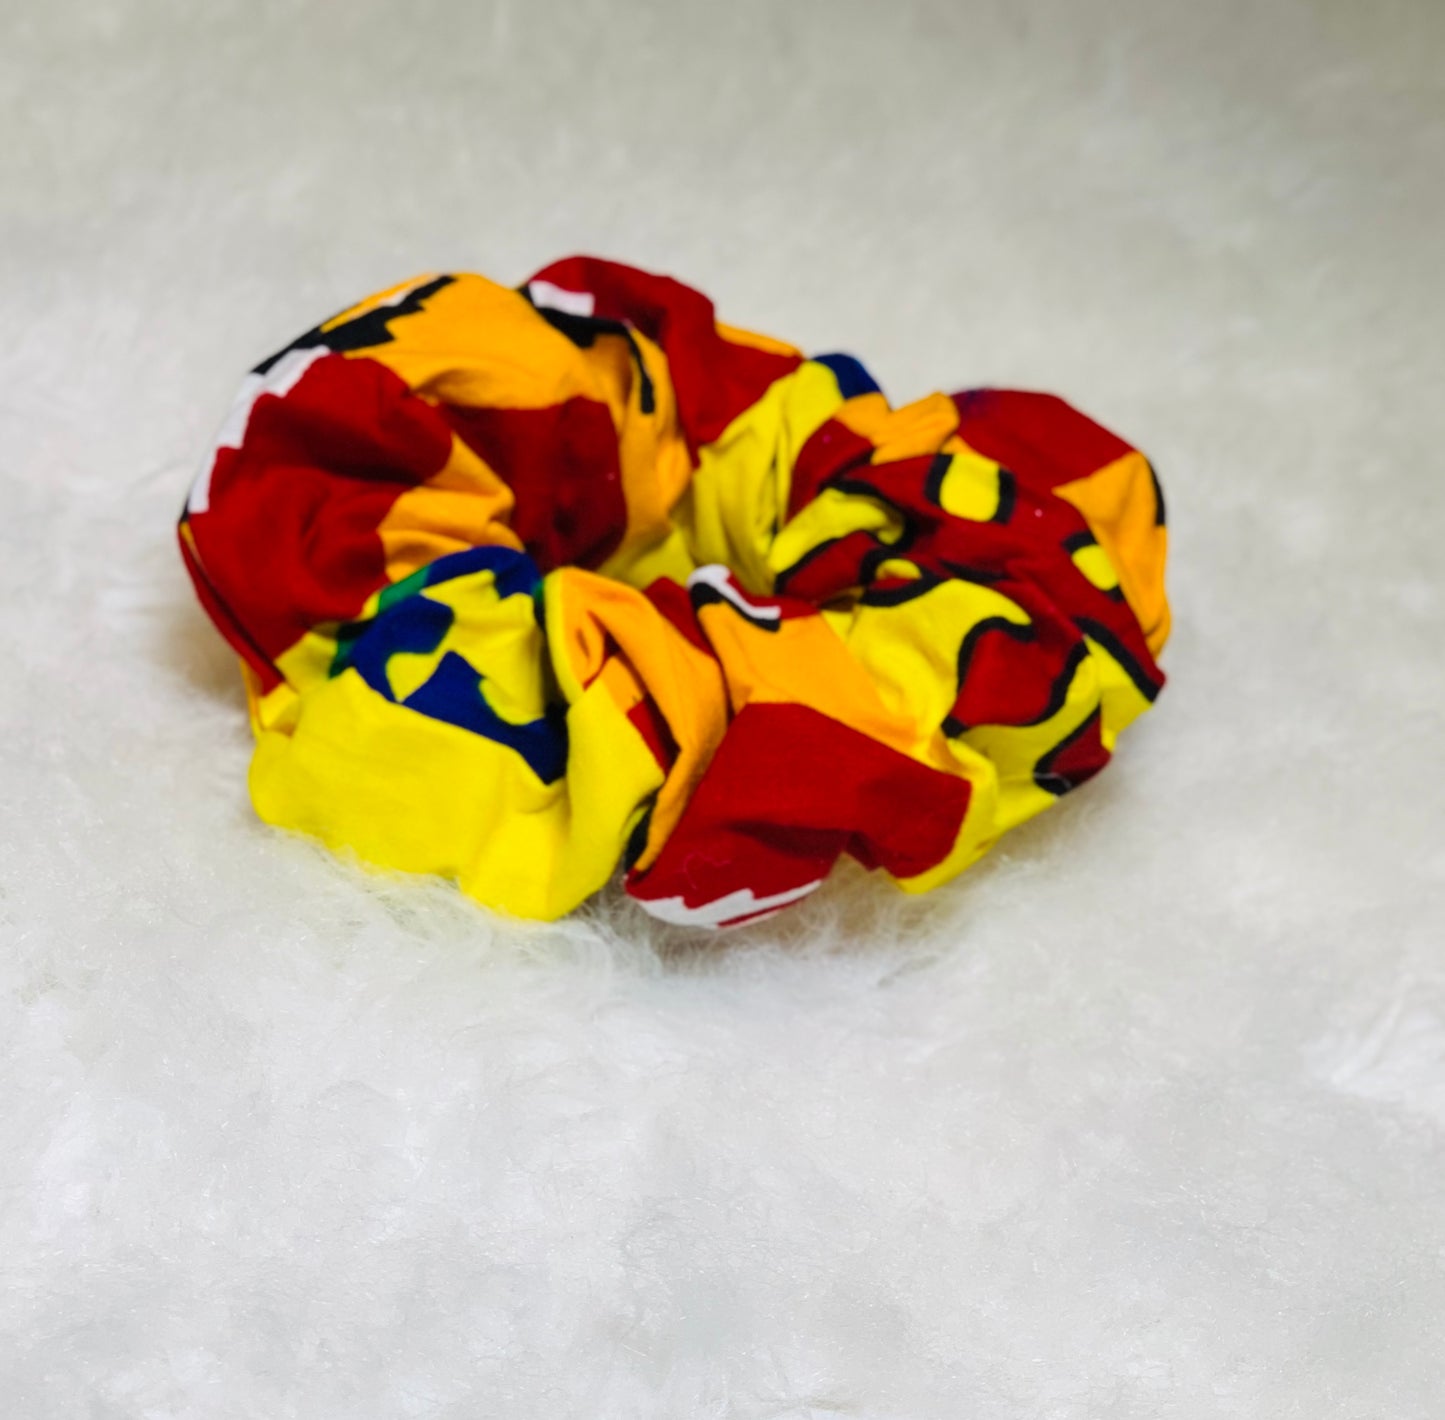 One Red, Yellow , Blue And White Medium Scrunchie